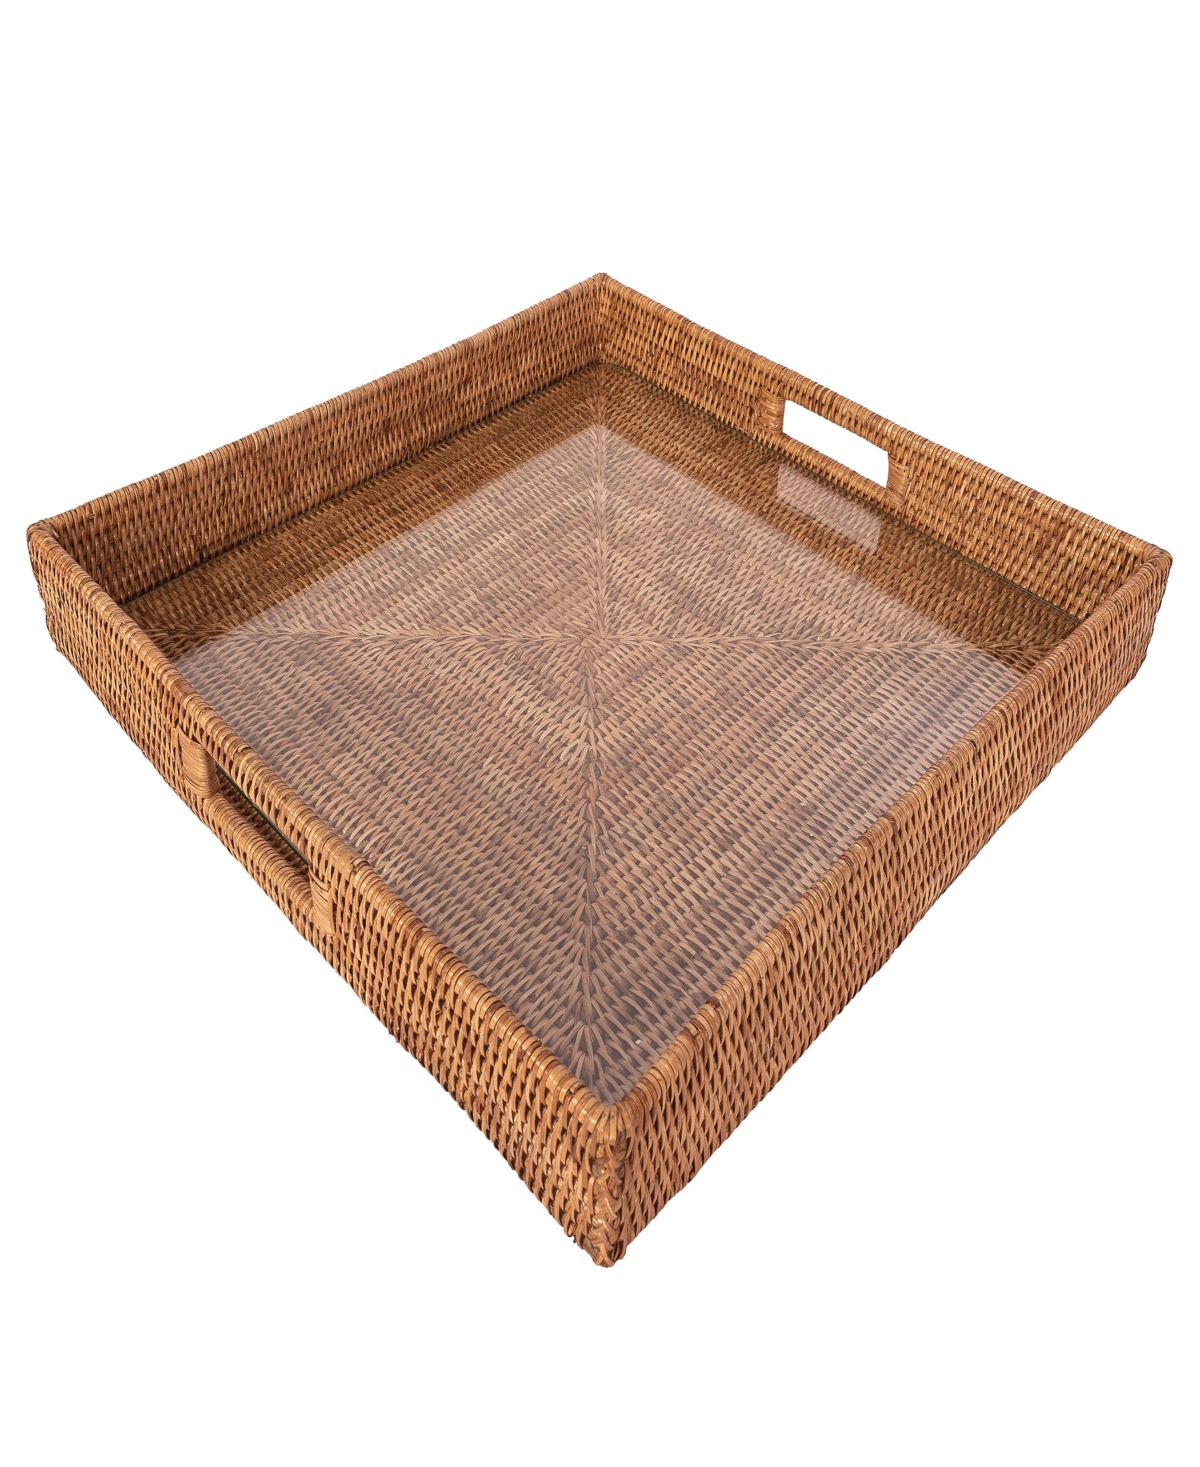 Shop Artifacts Trading Company Artifacts Rattan Square Serving Ottoman Tray With Glass Insert In Honey Brown